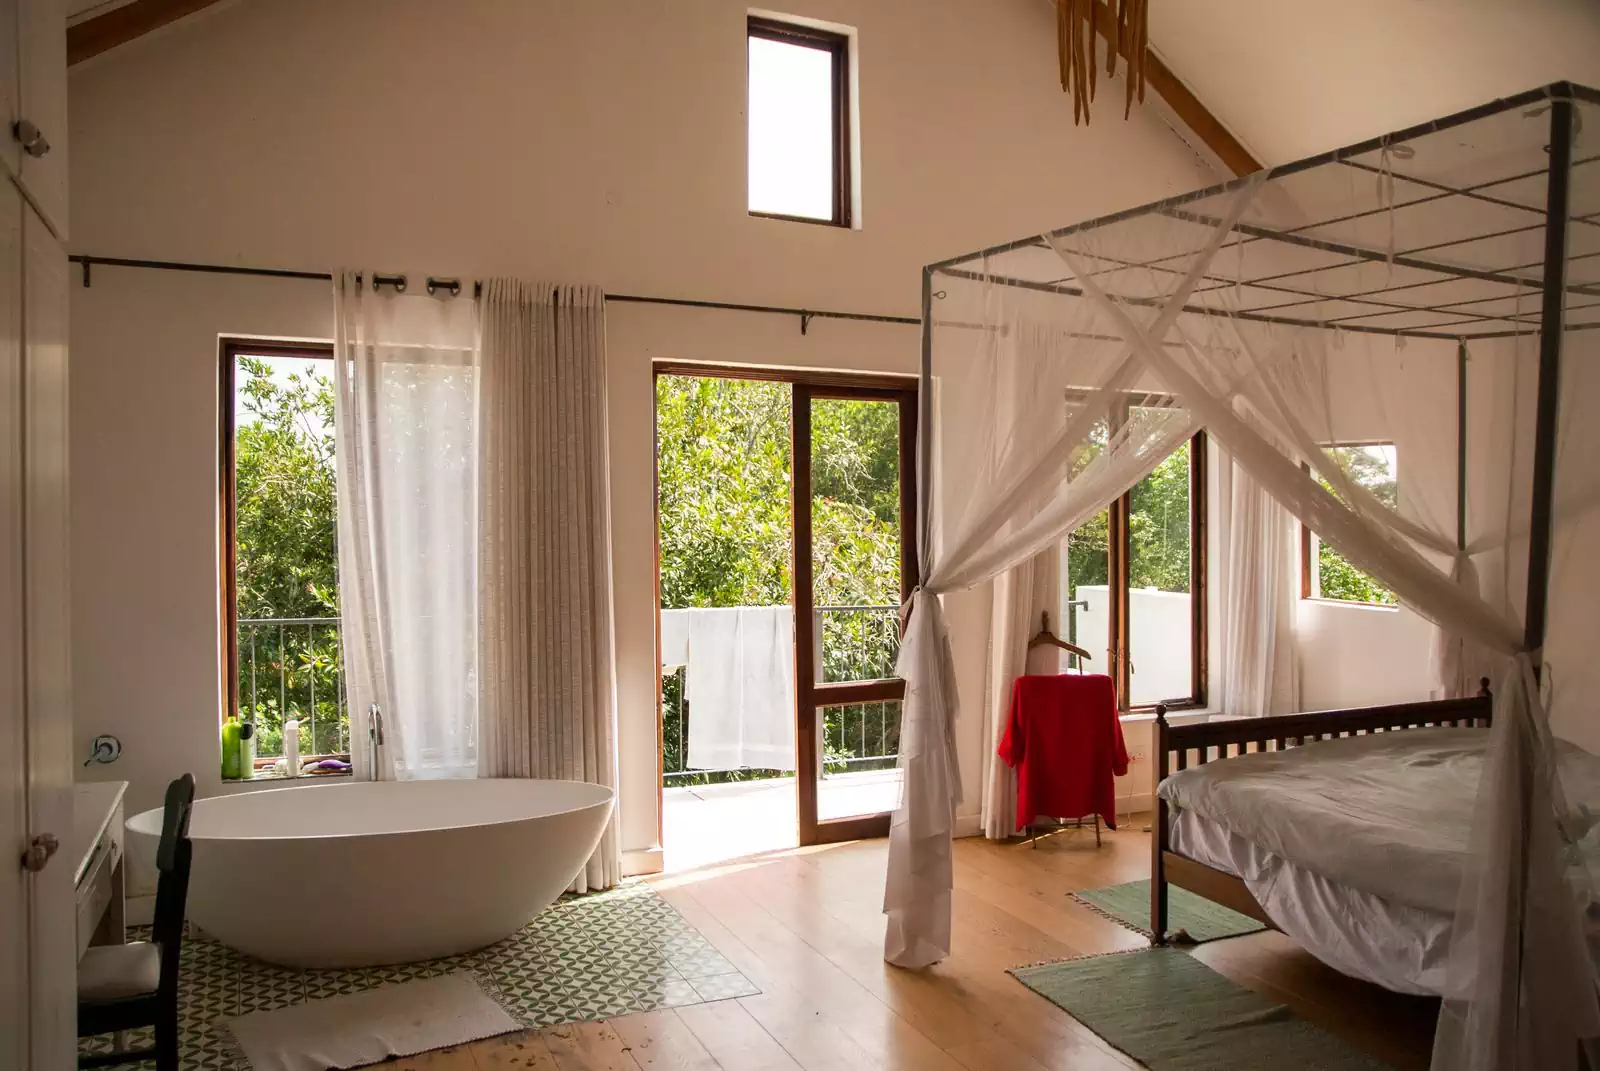 Bedroom with balcony in cape dutch house design in Harare